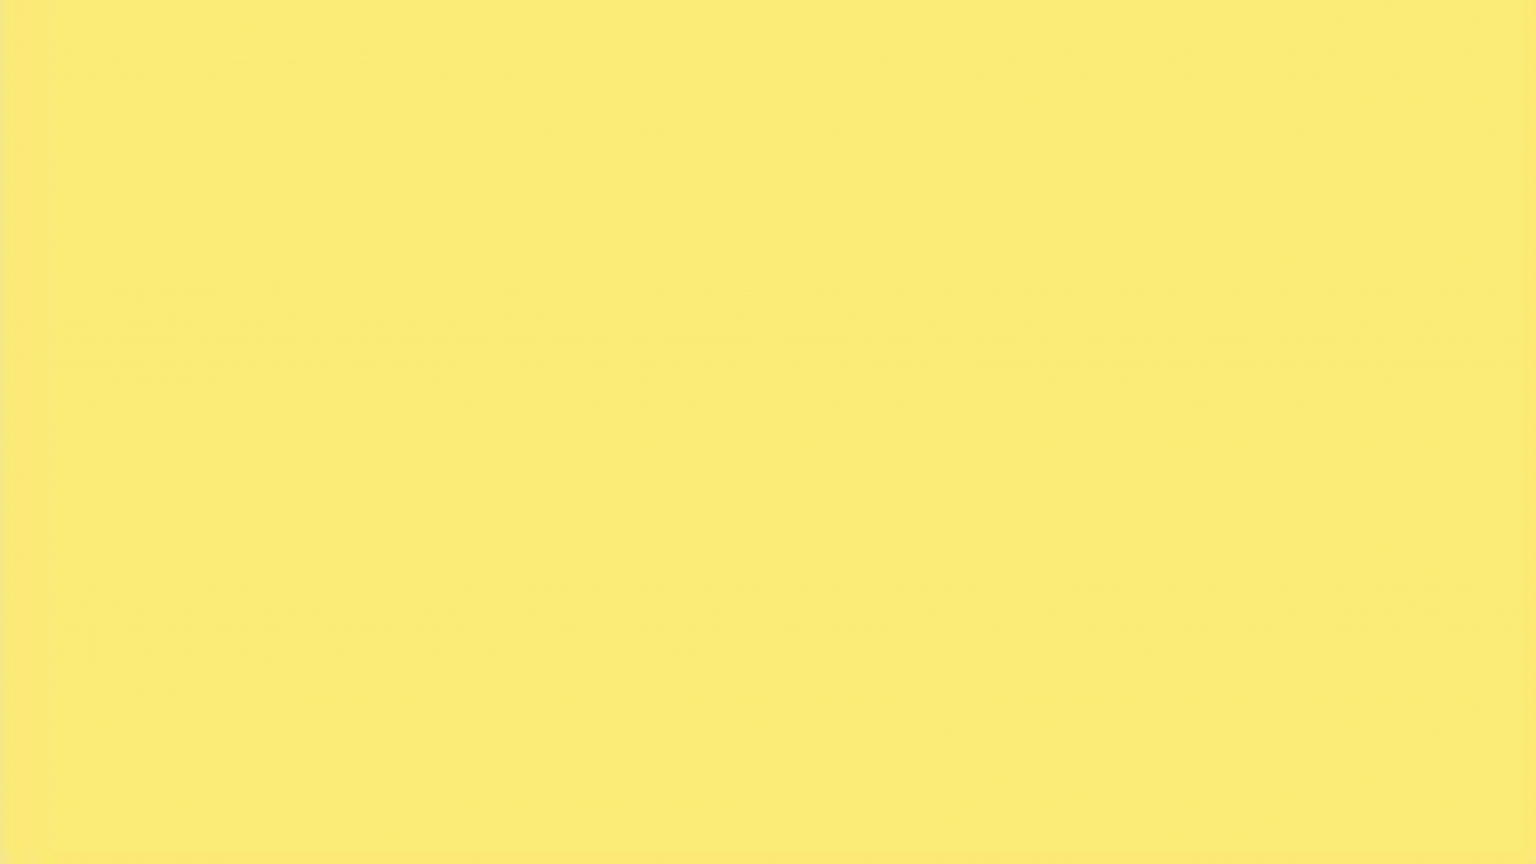 Free download Light Yellow Wallpaper [7195x4297] for your Desktop, Mobile & Tablet. Explore Light Yellow Background. Light Yellow Background, Light Yellow Wallpaper, Light Blue and Yellow Wallpaper